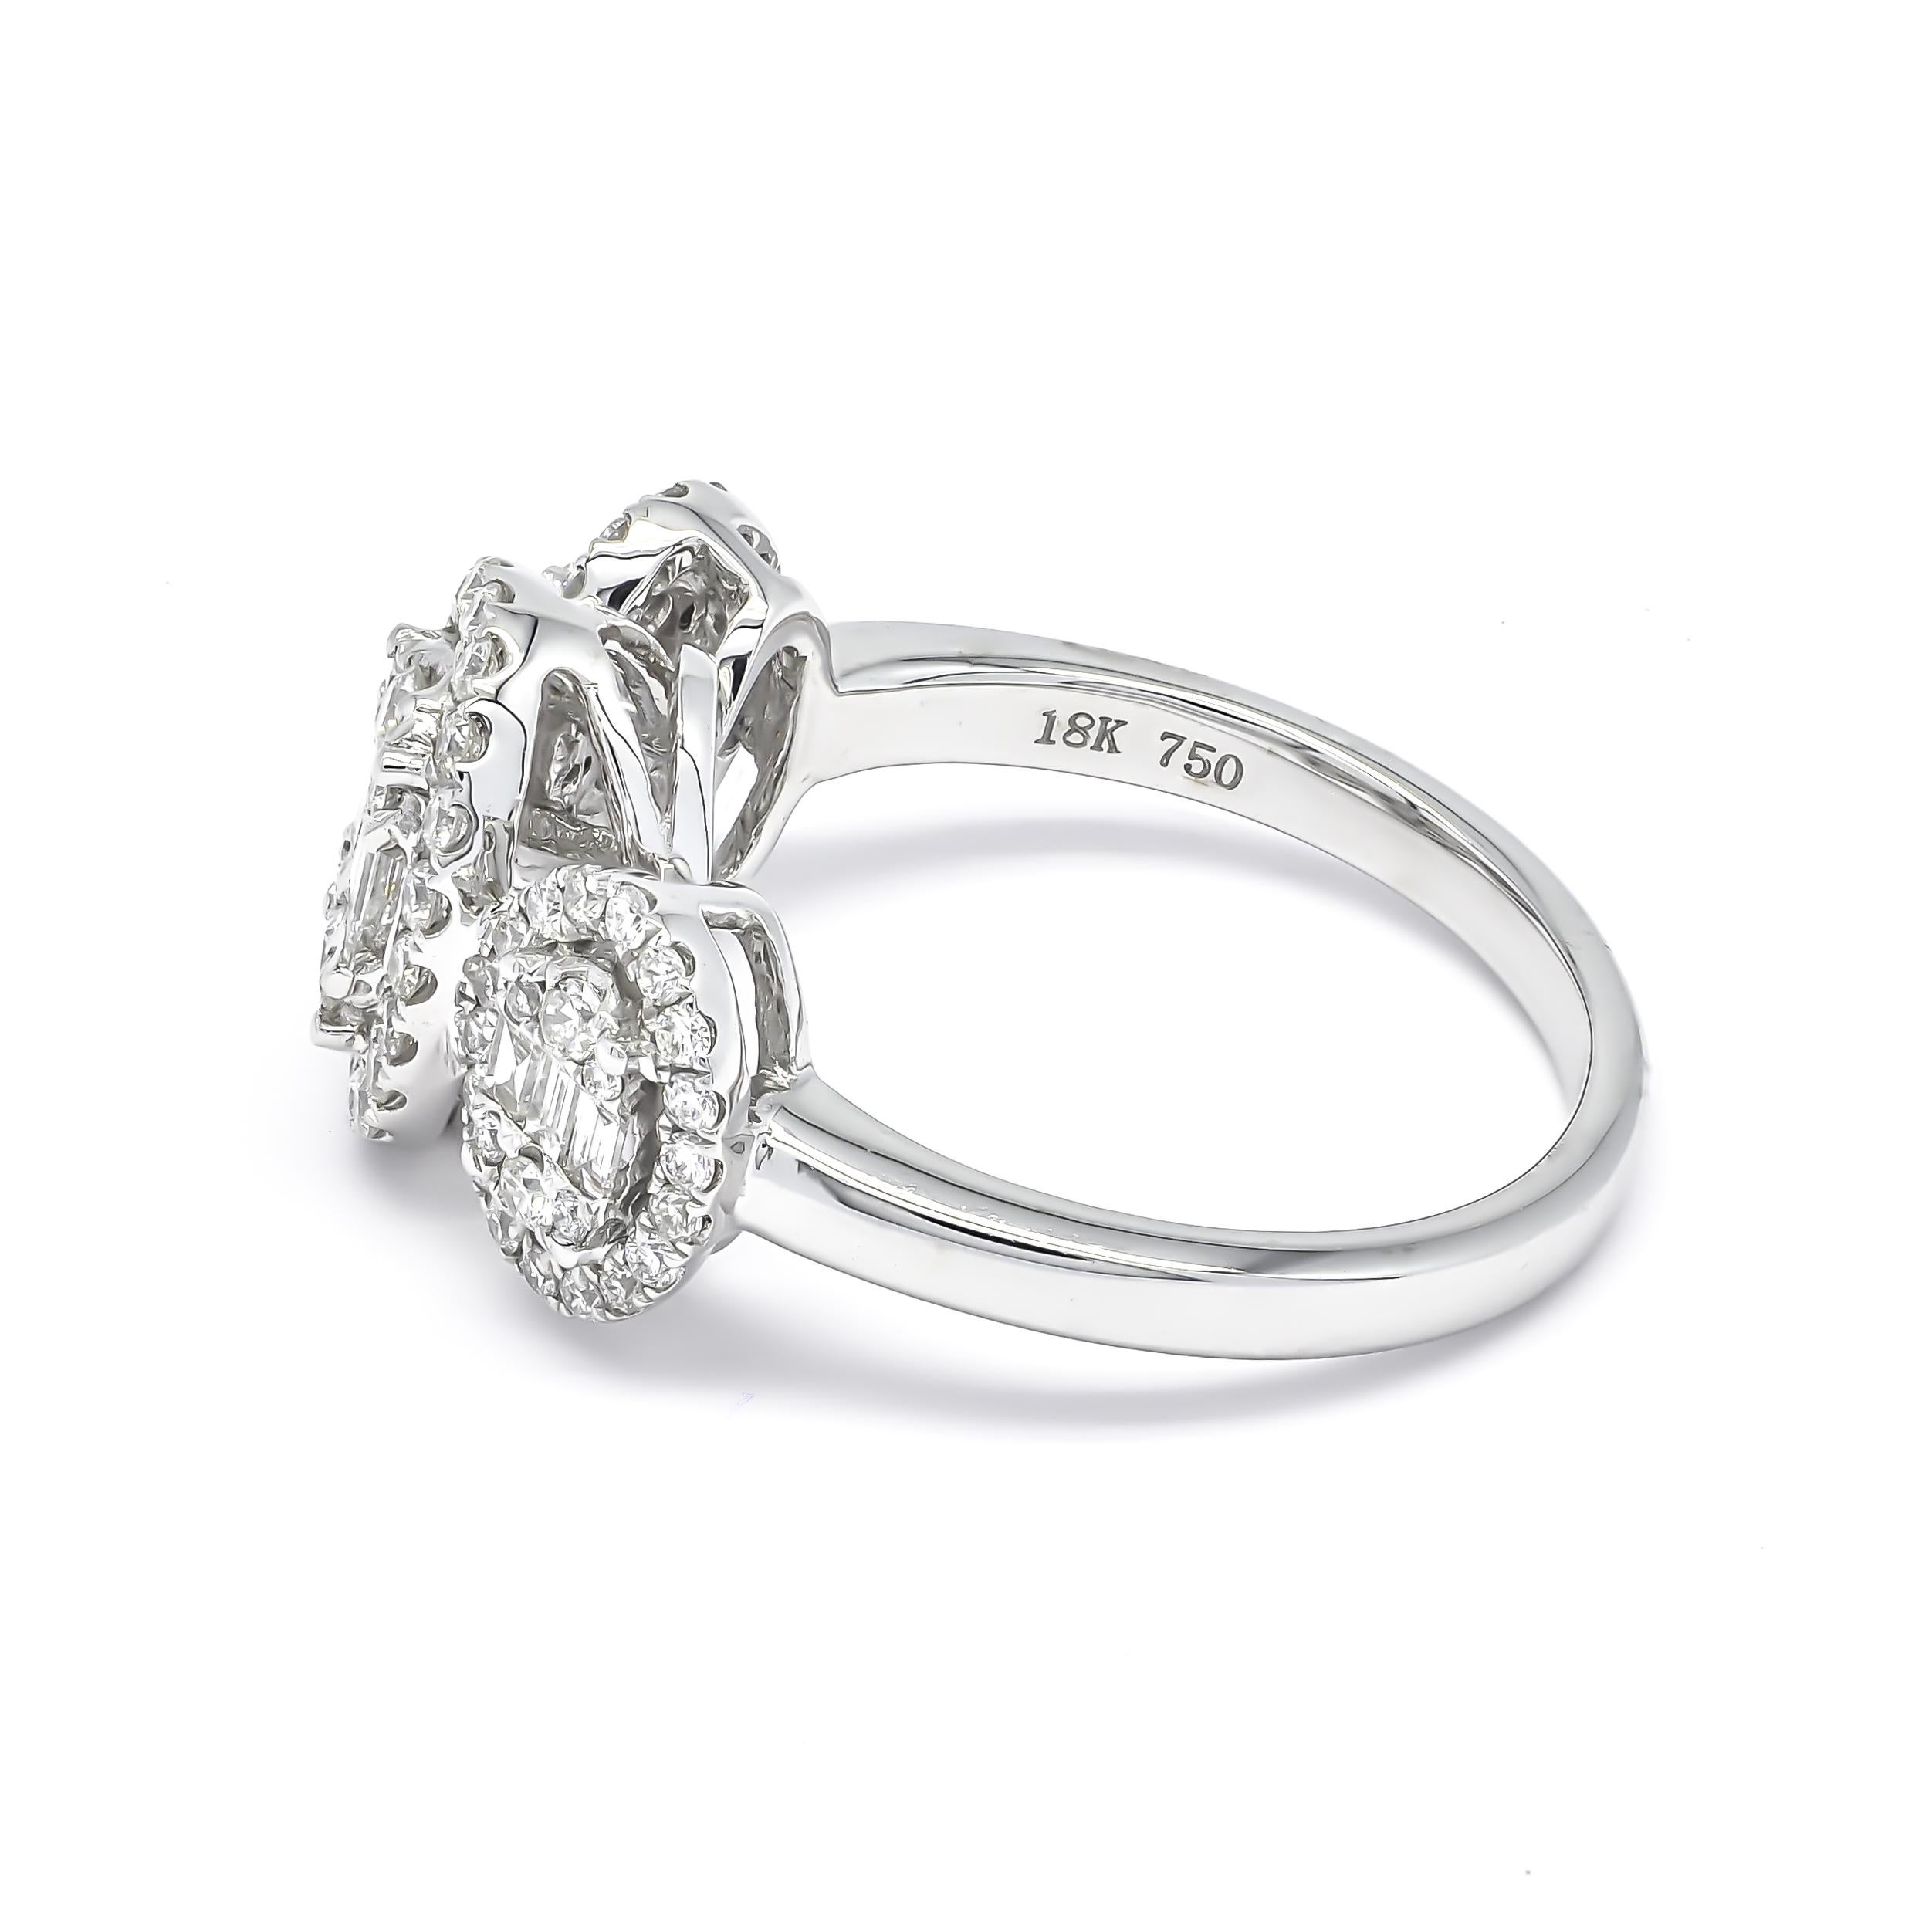 For Sale:  18KT White Gold 3 Cluster Diamond Engagement Ring R61146, Statement Diamond Ring 5